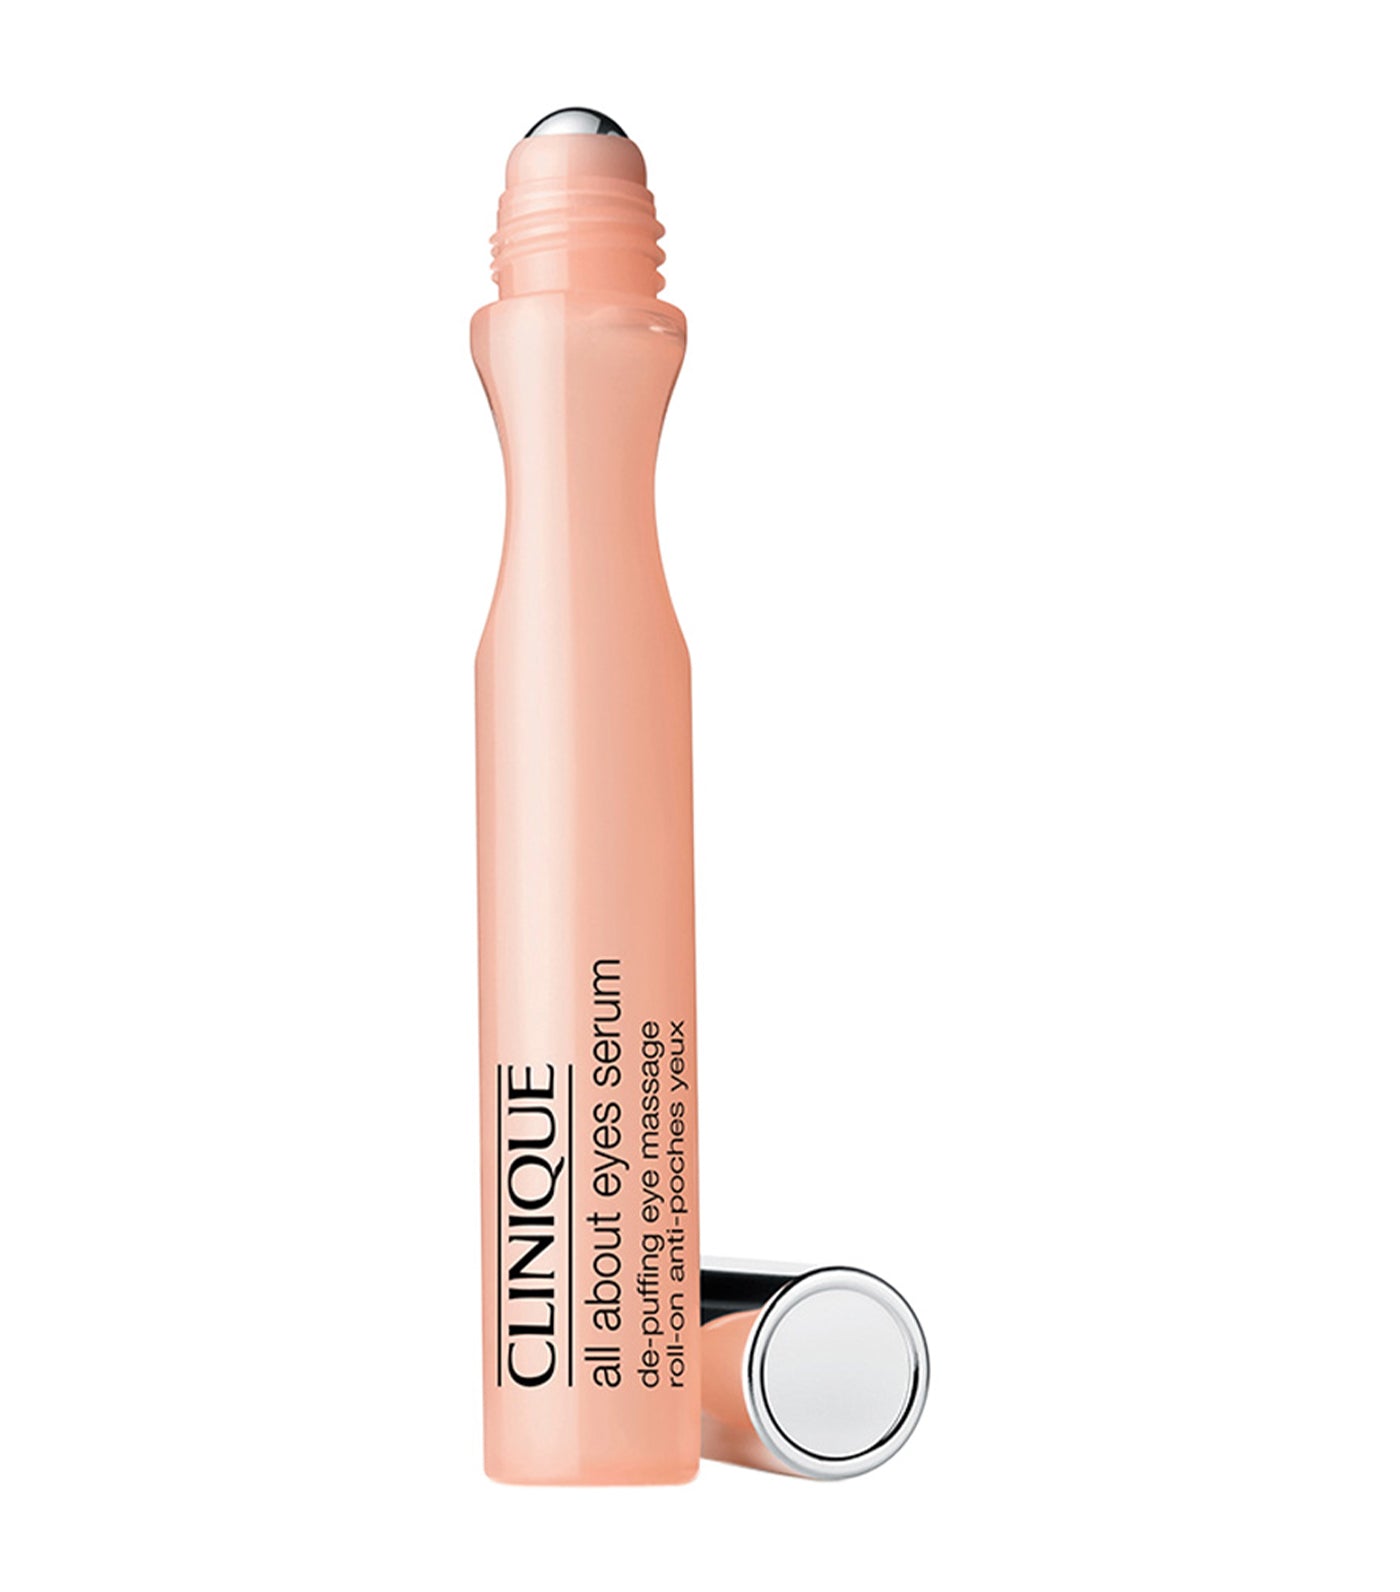 clinique all about eyes serum de-puffing eye massage